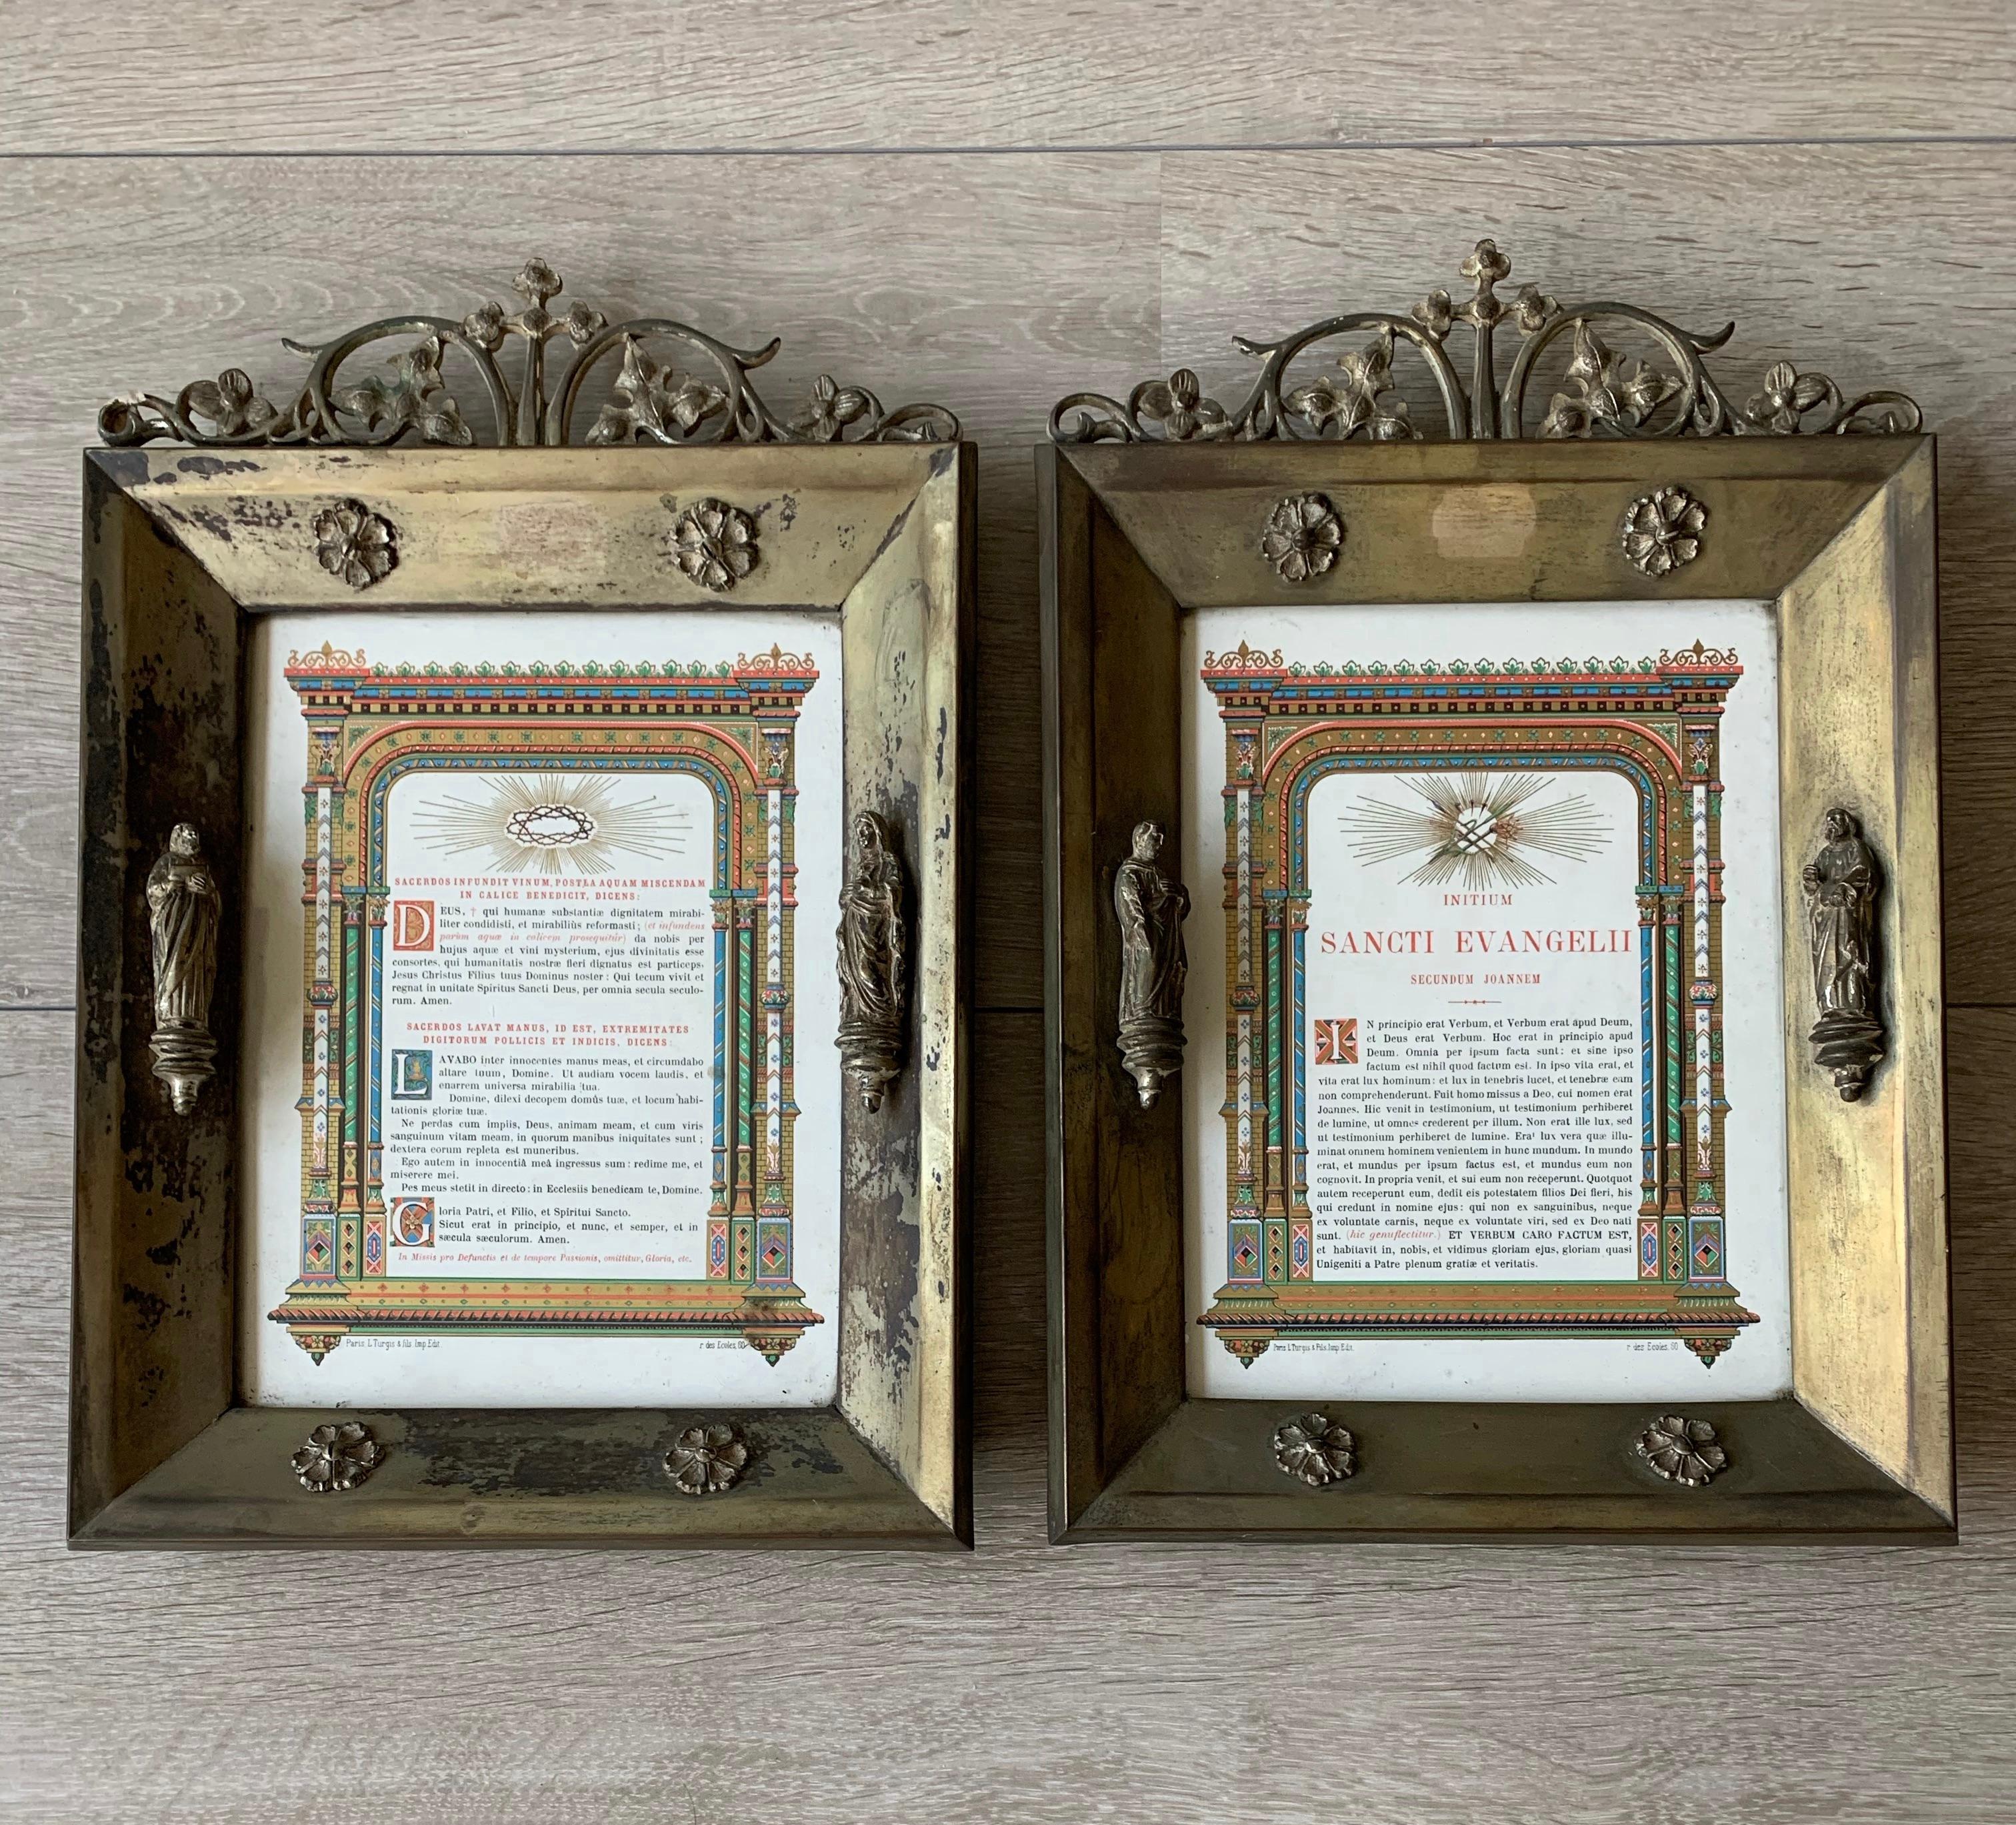 For the collectors of rare and ready to use Gothic antiques.

These beautiful and all handcrafted Gothic Revival picture frames with Biblical texts in Latin are an absolute joy to own and look at. They date from the turn of the century (ca. 1900)